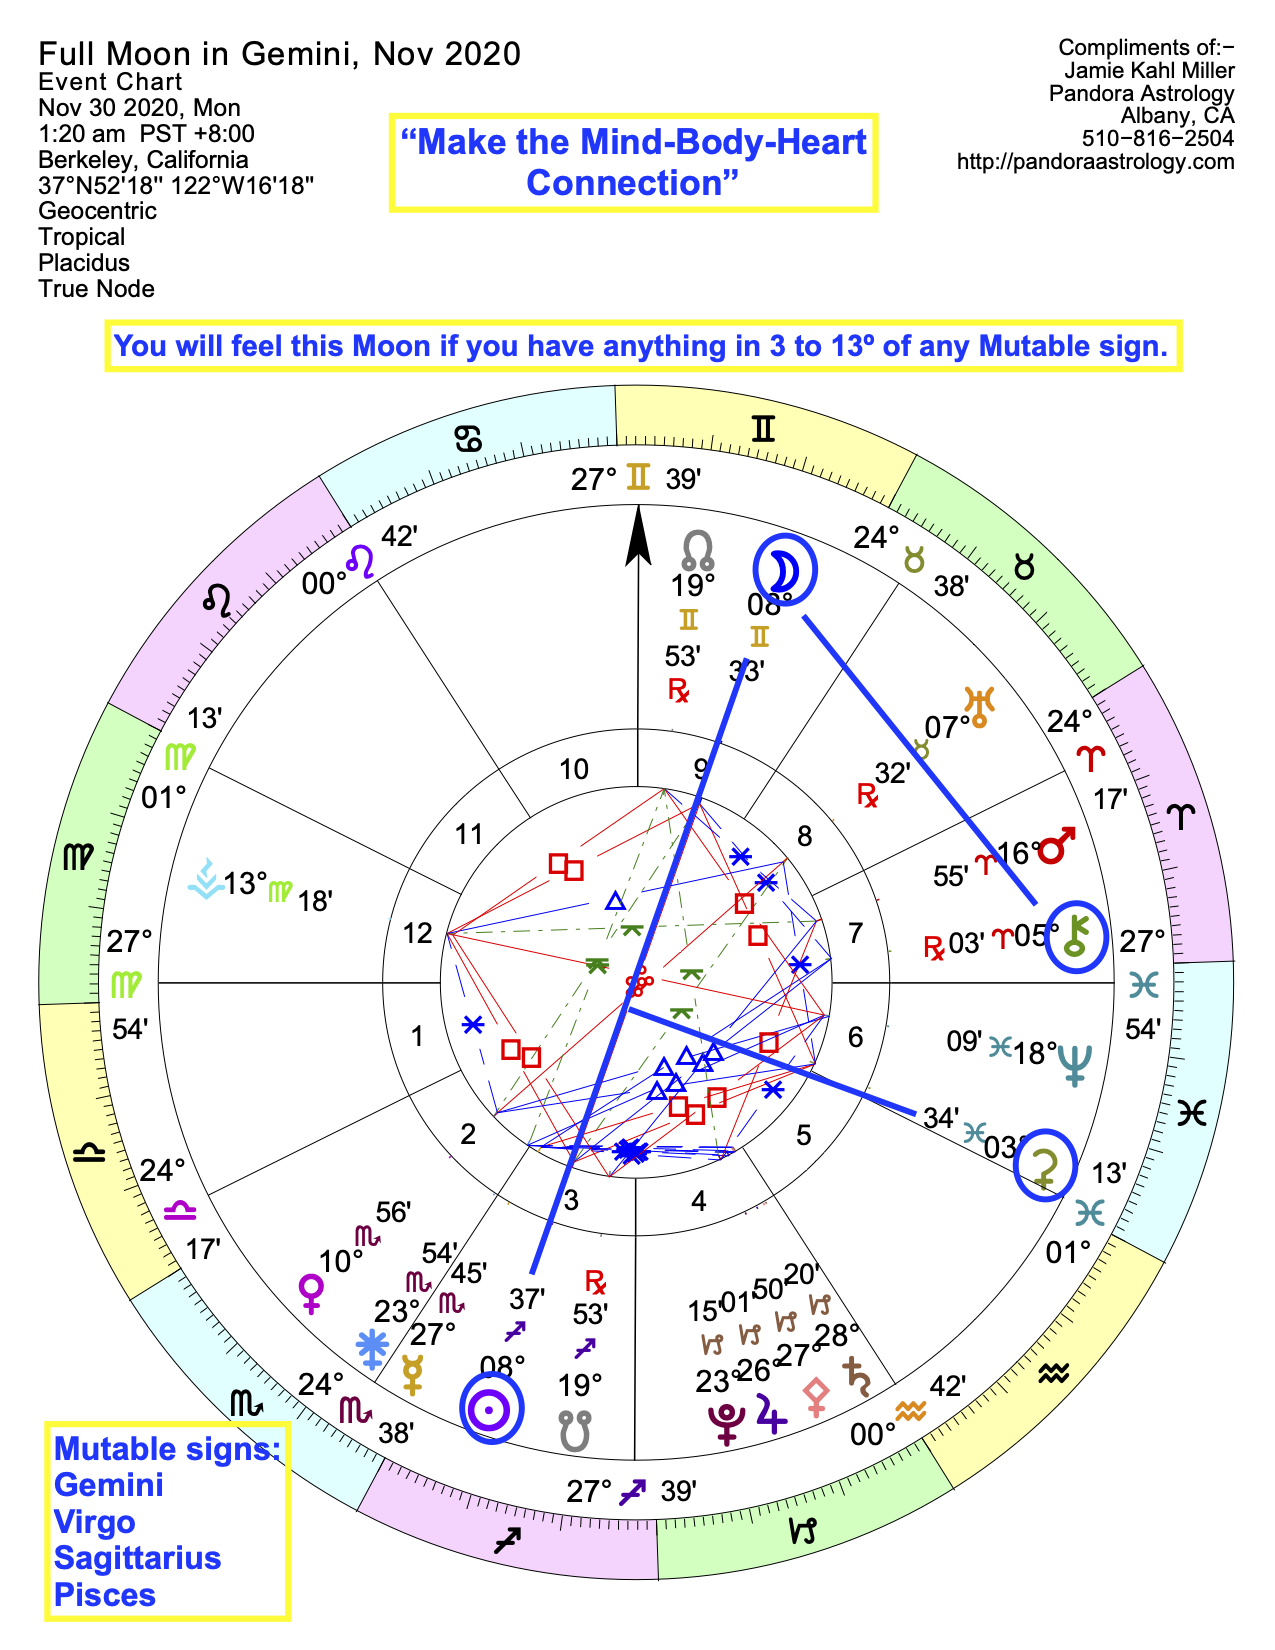 Astrology Chart of Gemini Full Moon and Lunar Eclipse in November 2020